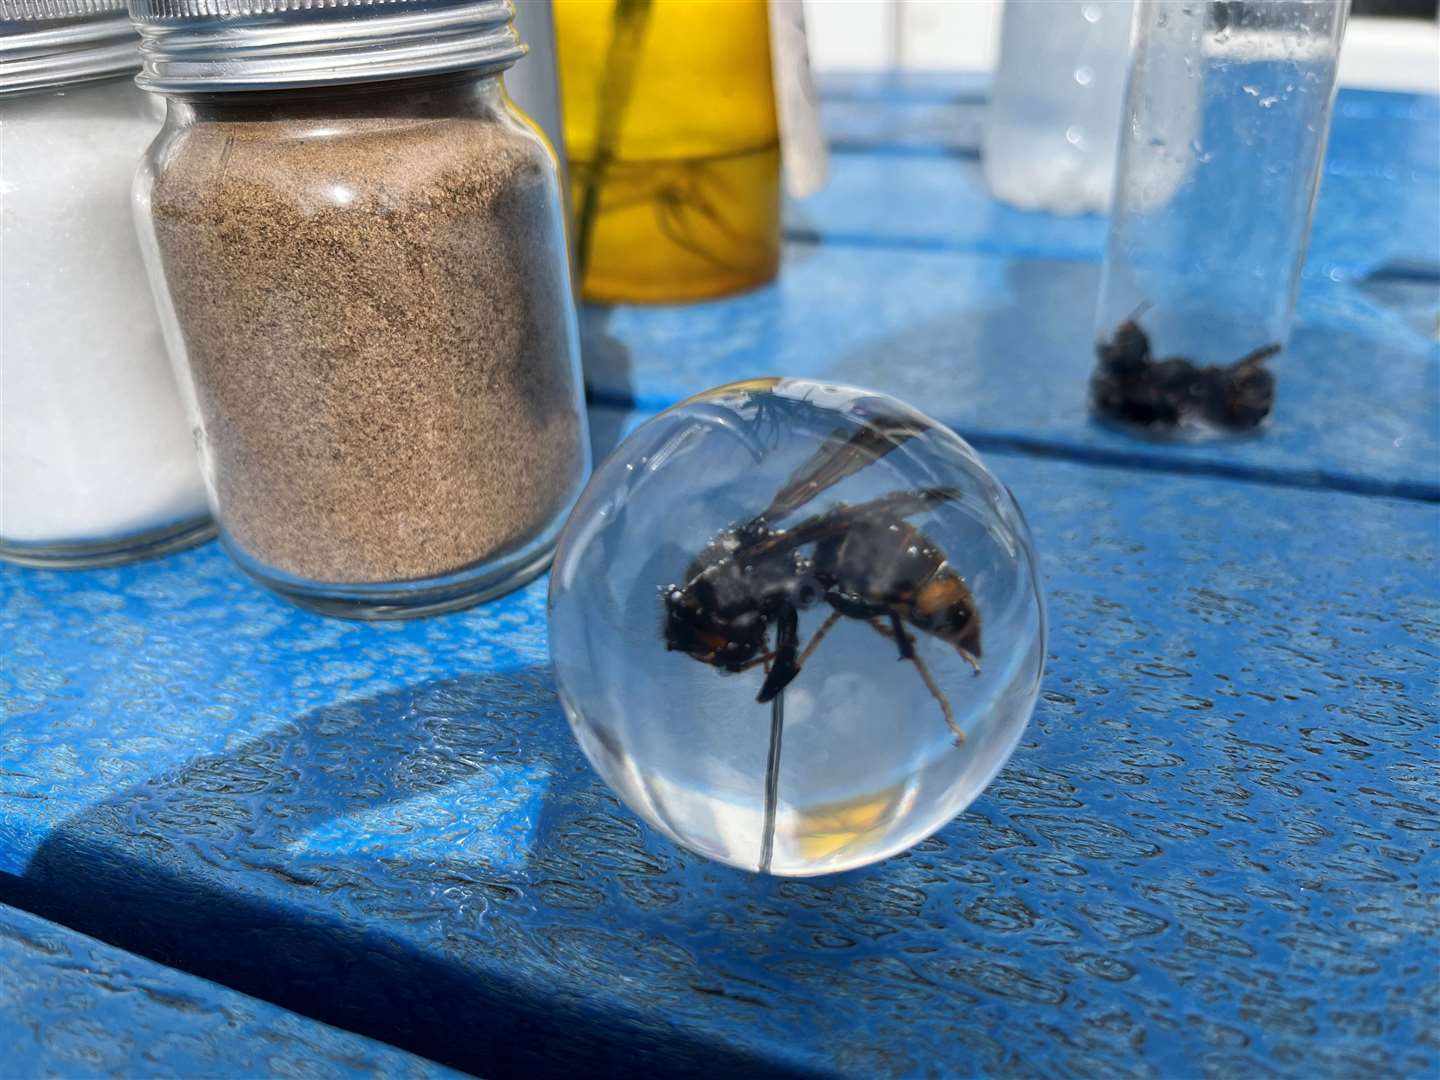 Mr Down has had several Asian hornets preserved to show people what they look like